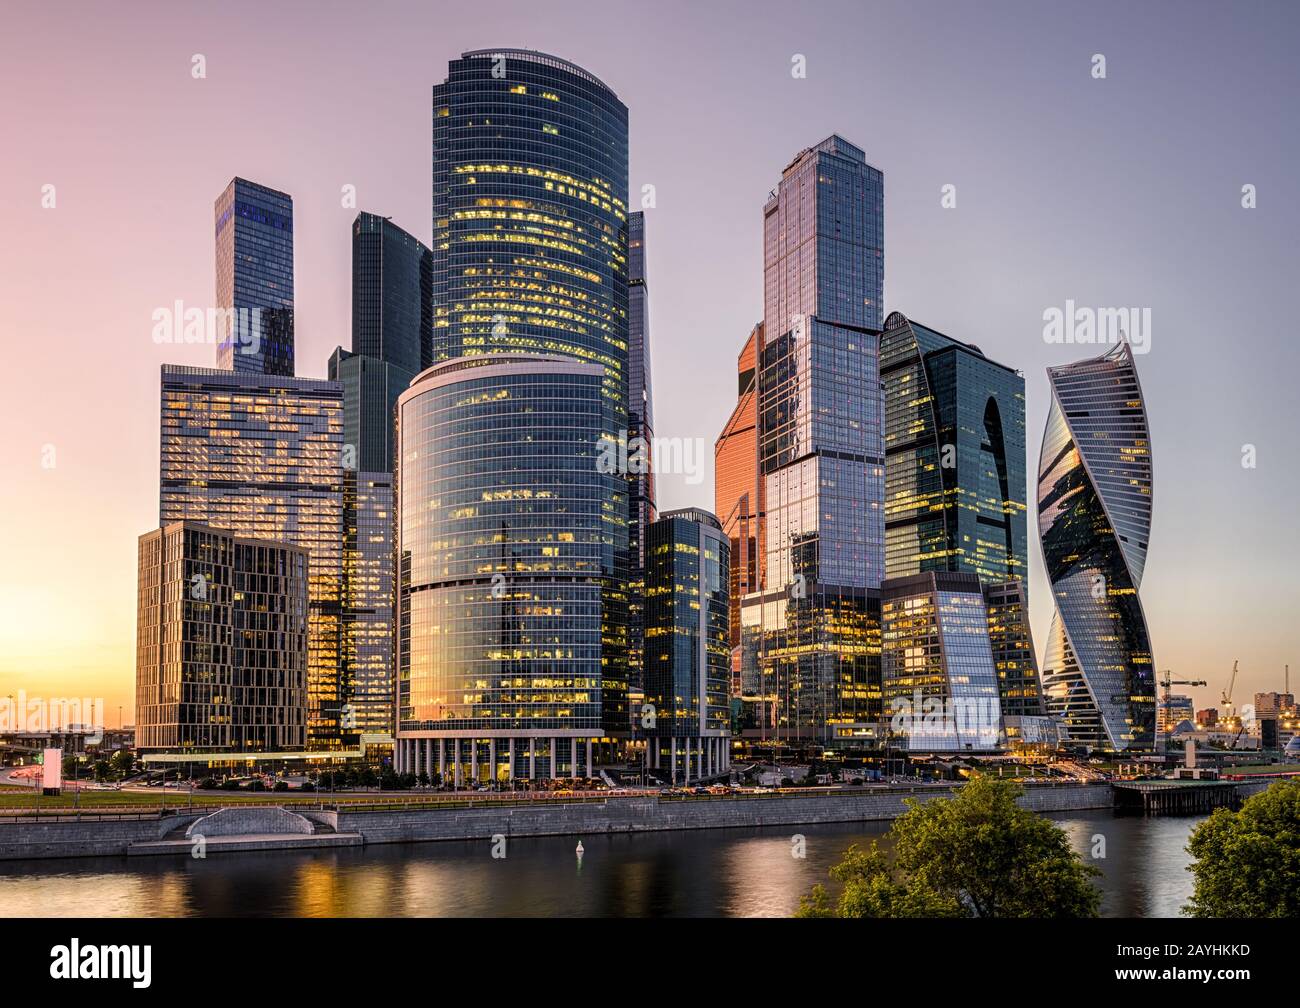 Moscow International Business Center or Moskva-City at sunset, Moscow, Russia. It is a new district with skyscrapers in the Moscow center. Panorama of Stock Photo